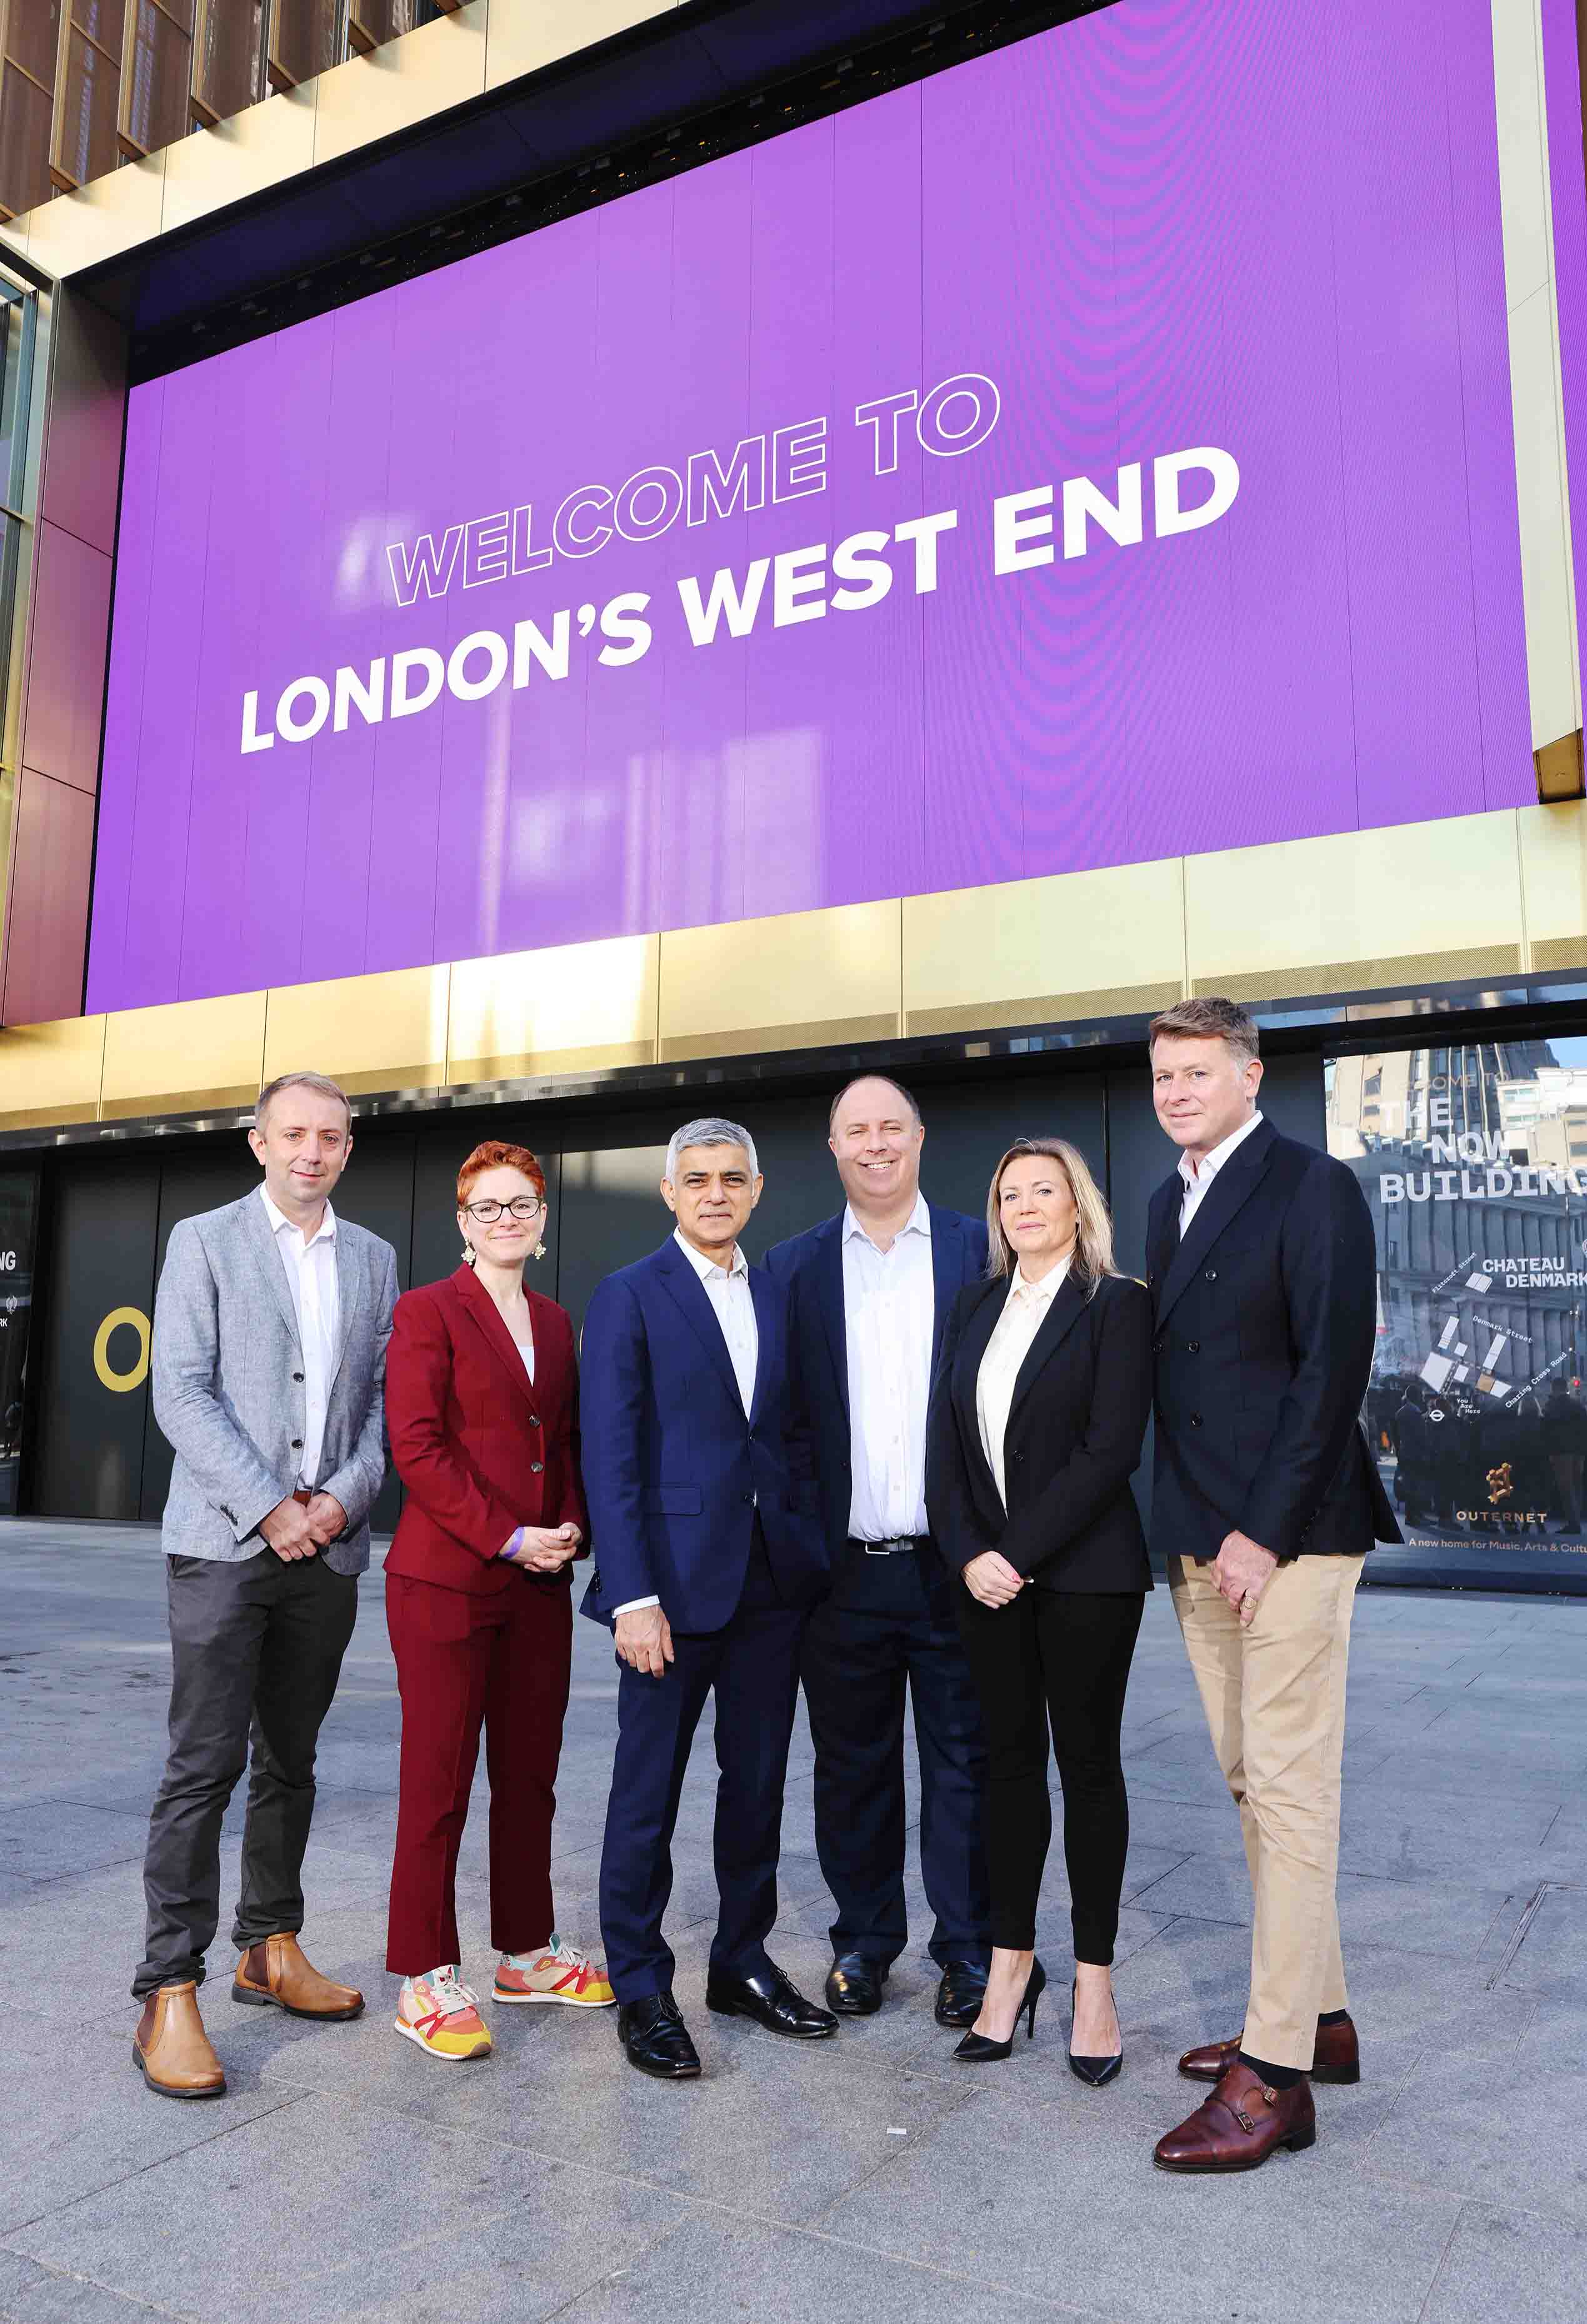 Mayor of London Sadiq Khan with the West End team and Philip O'Ferrall standing in front of The Now Building